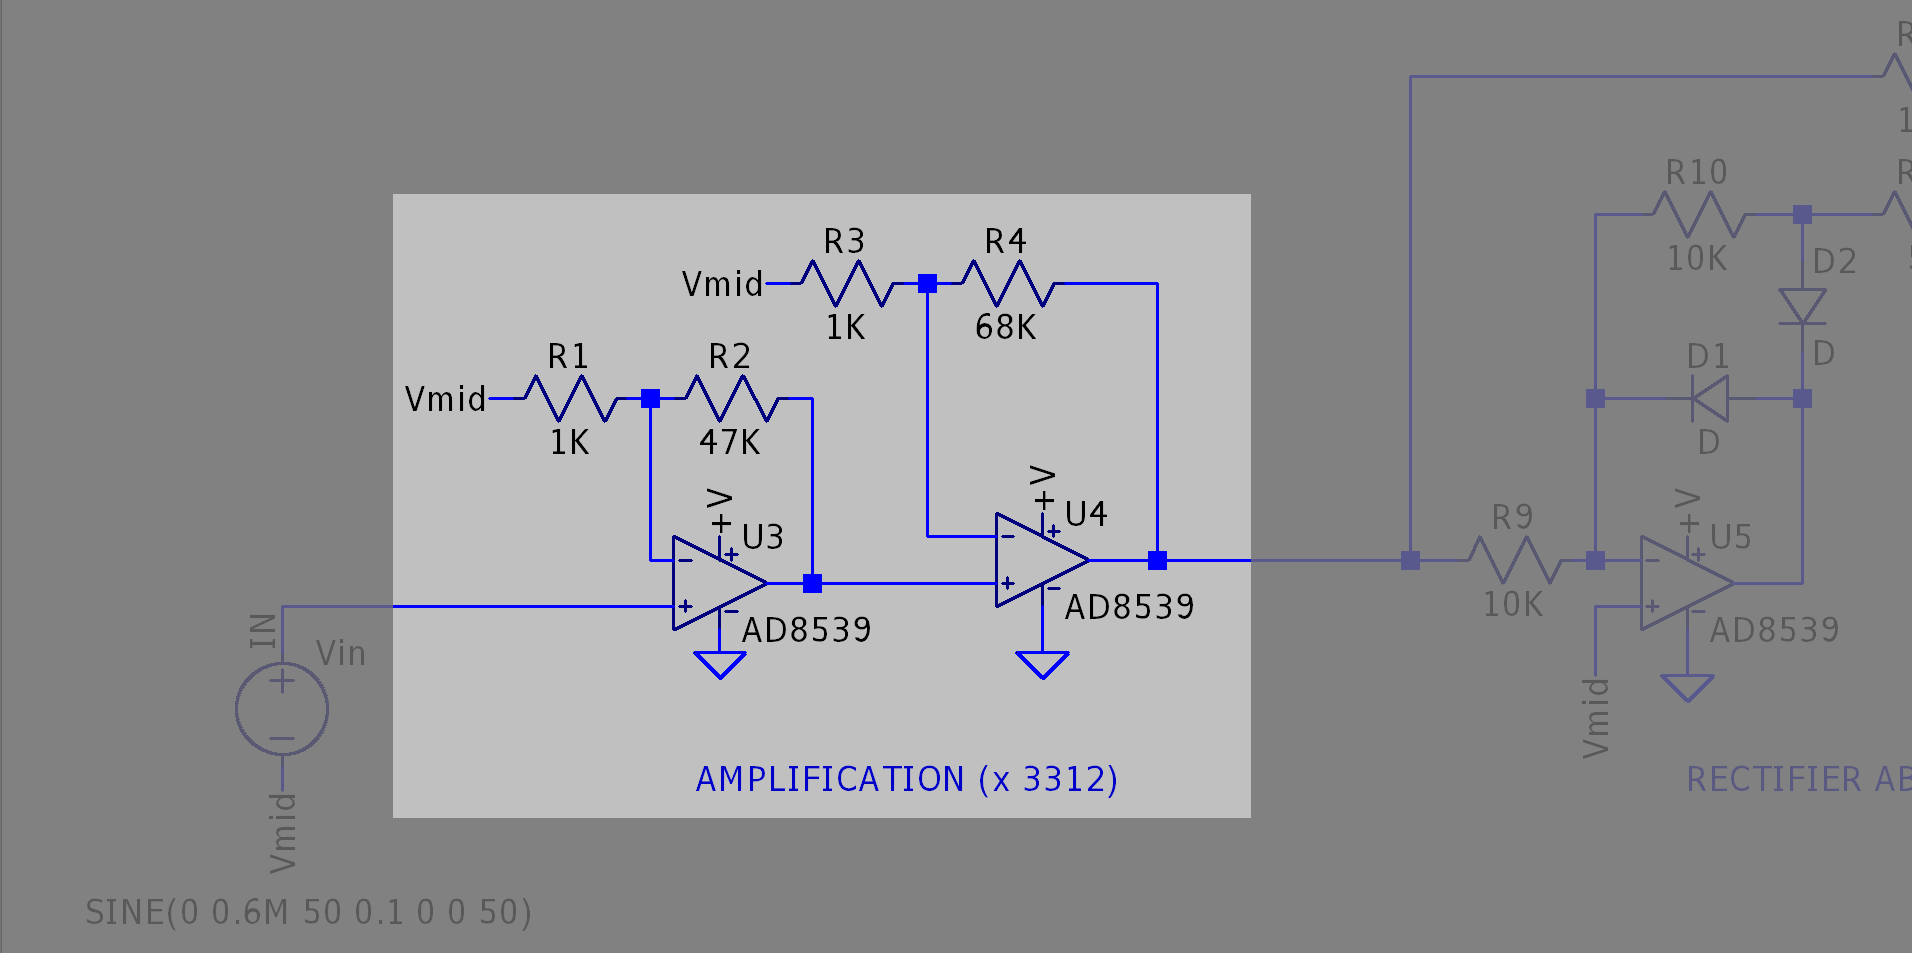 Coil signal amplification